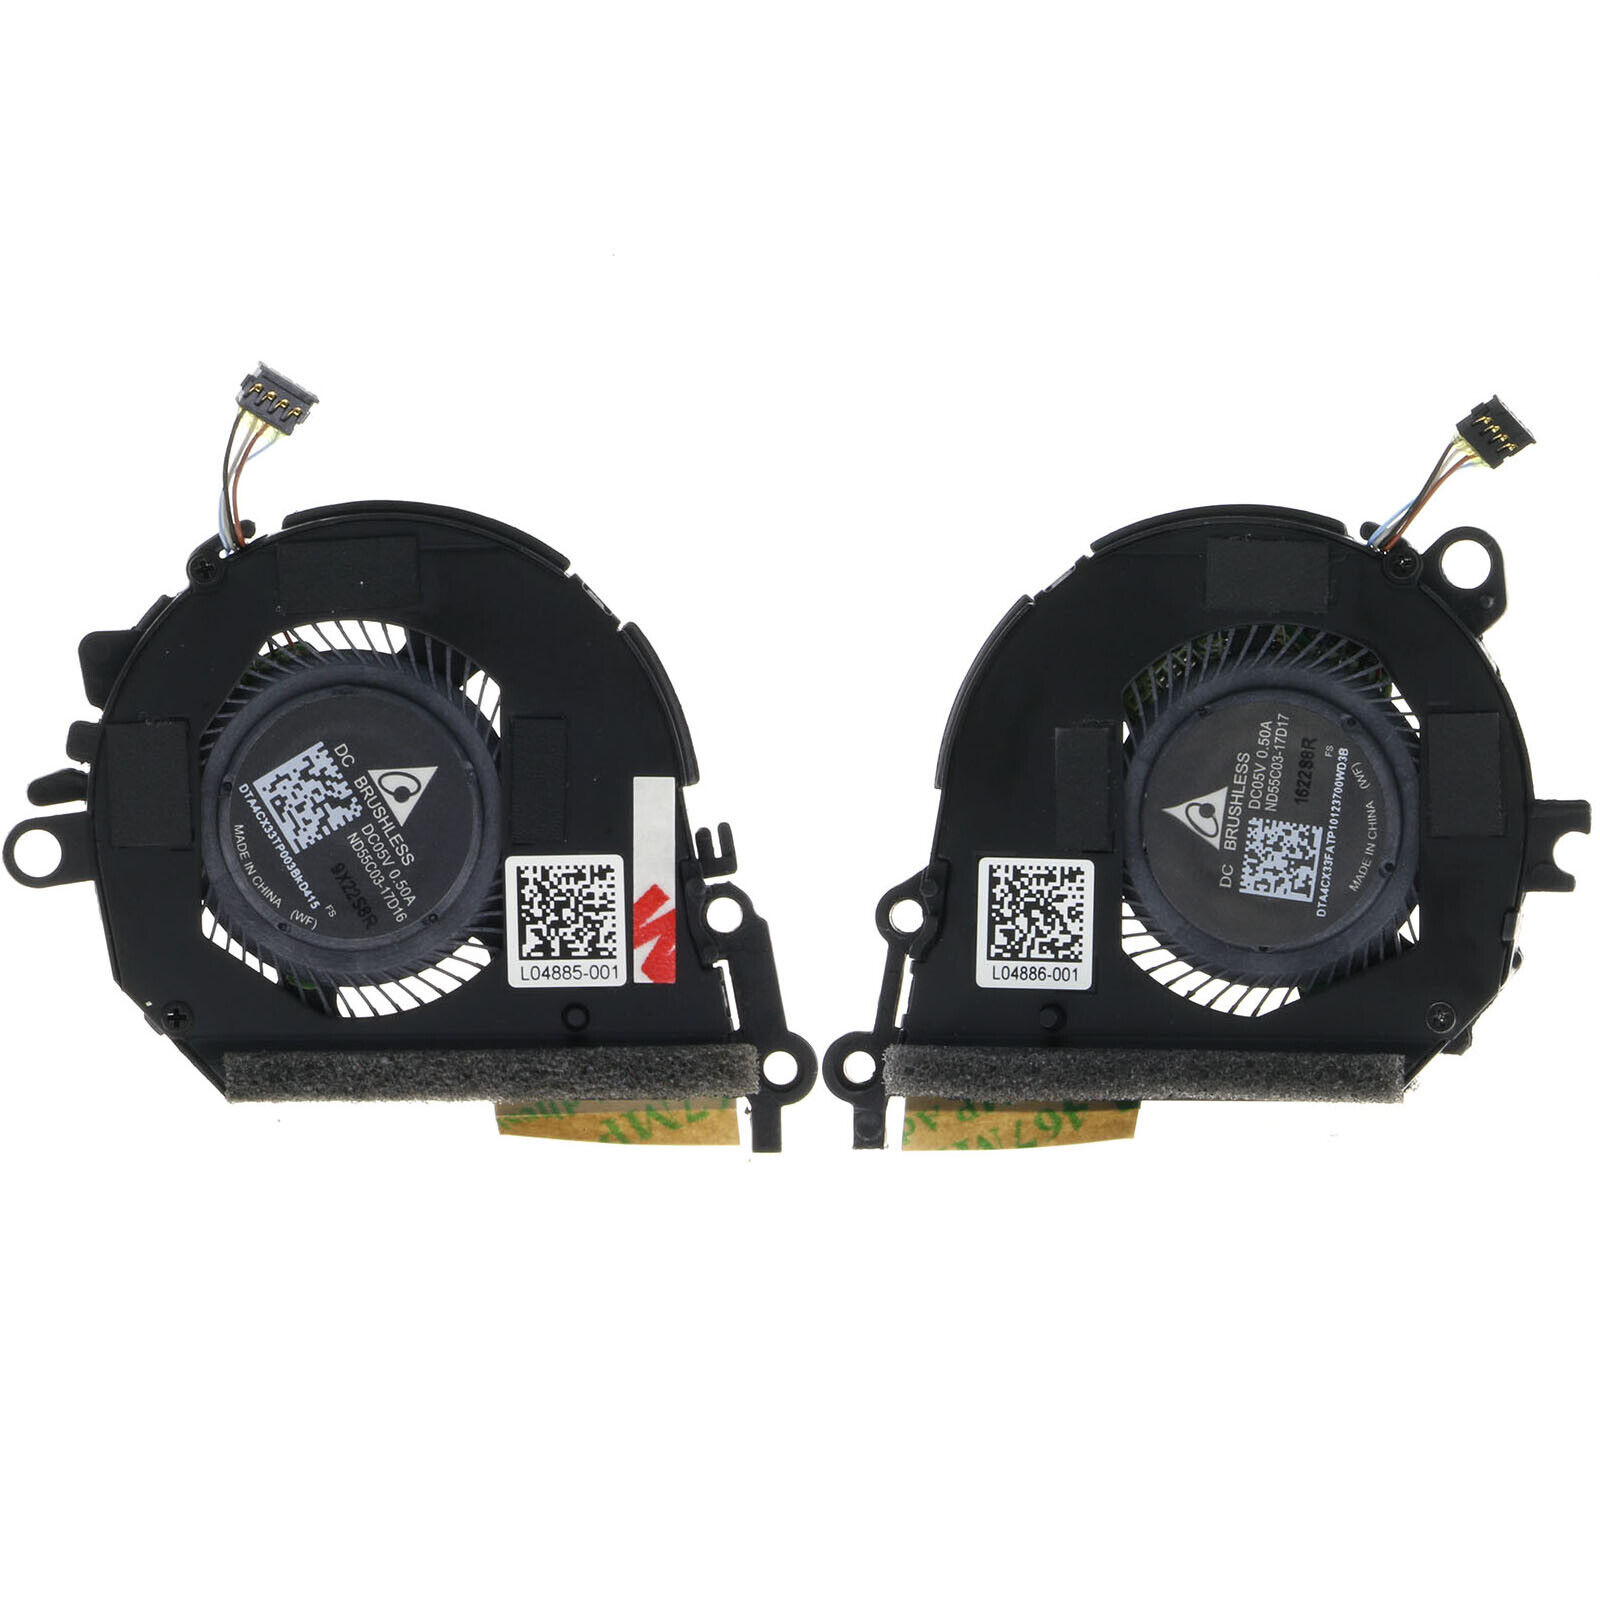 NEW CPU&GPU Two Cooling Fans For HP 13